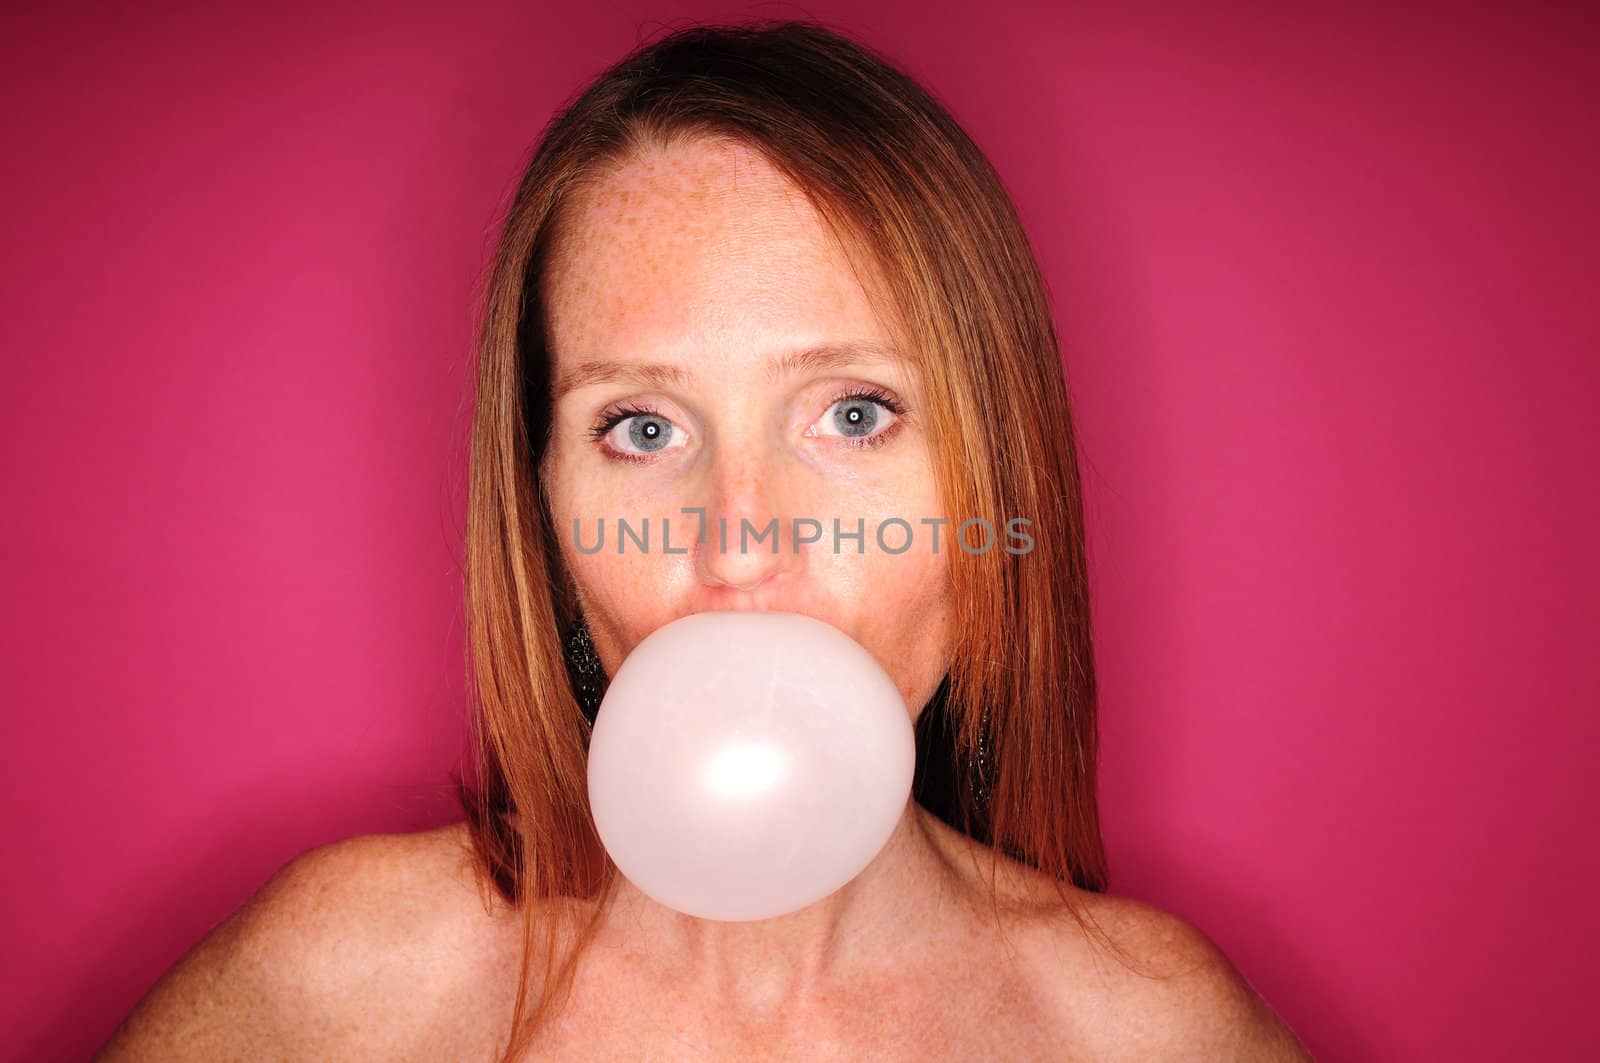 Young woman with red hair and blue eyes blowing a bubble with chewing gum on a pink background